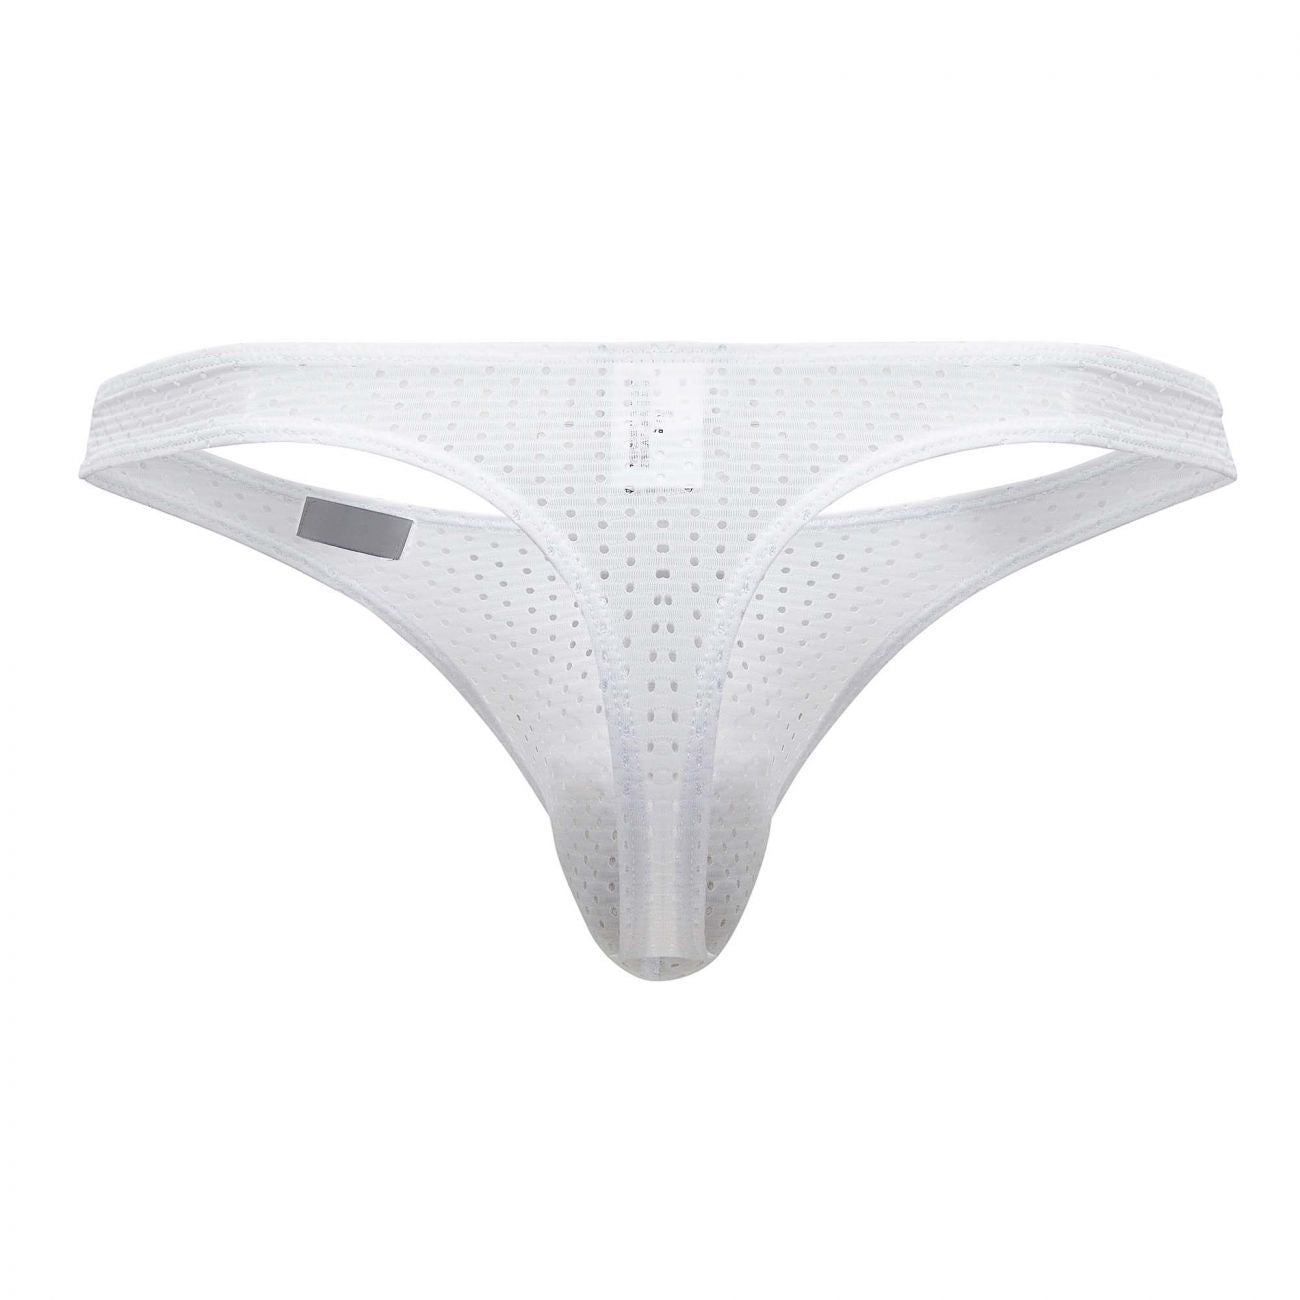 Clever 0929 Fits Thongs White